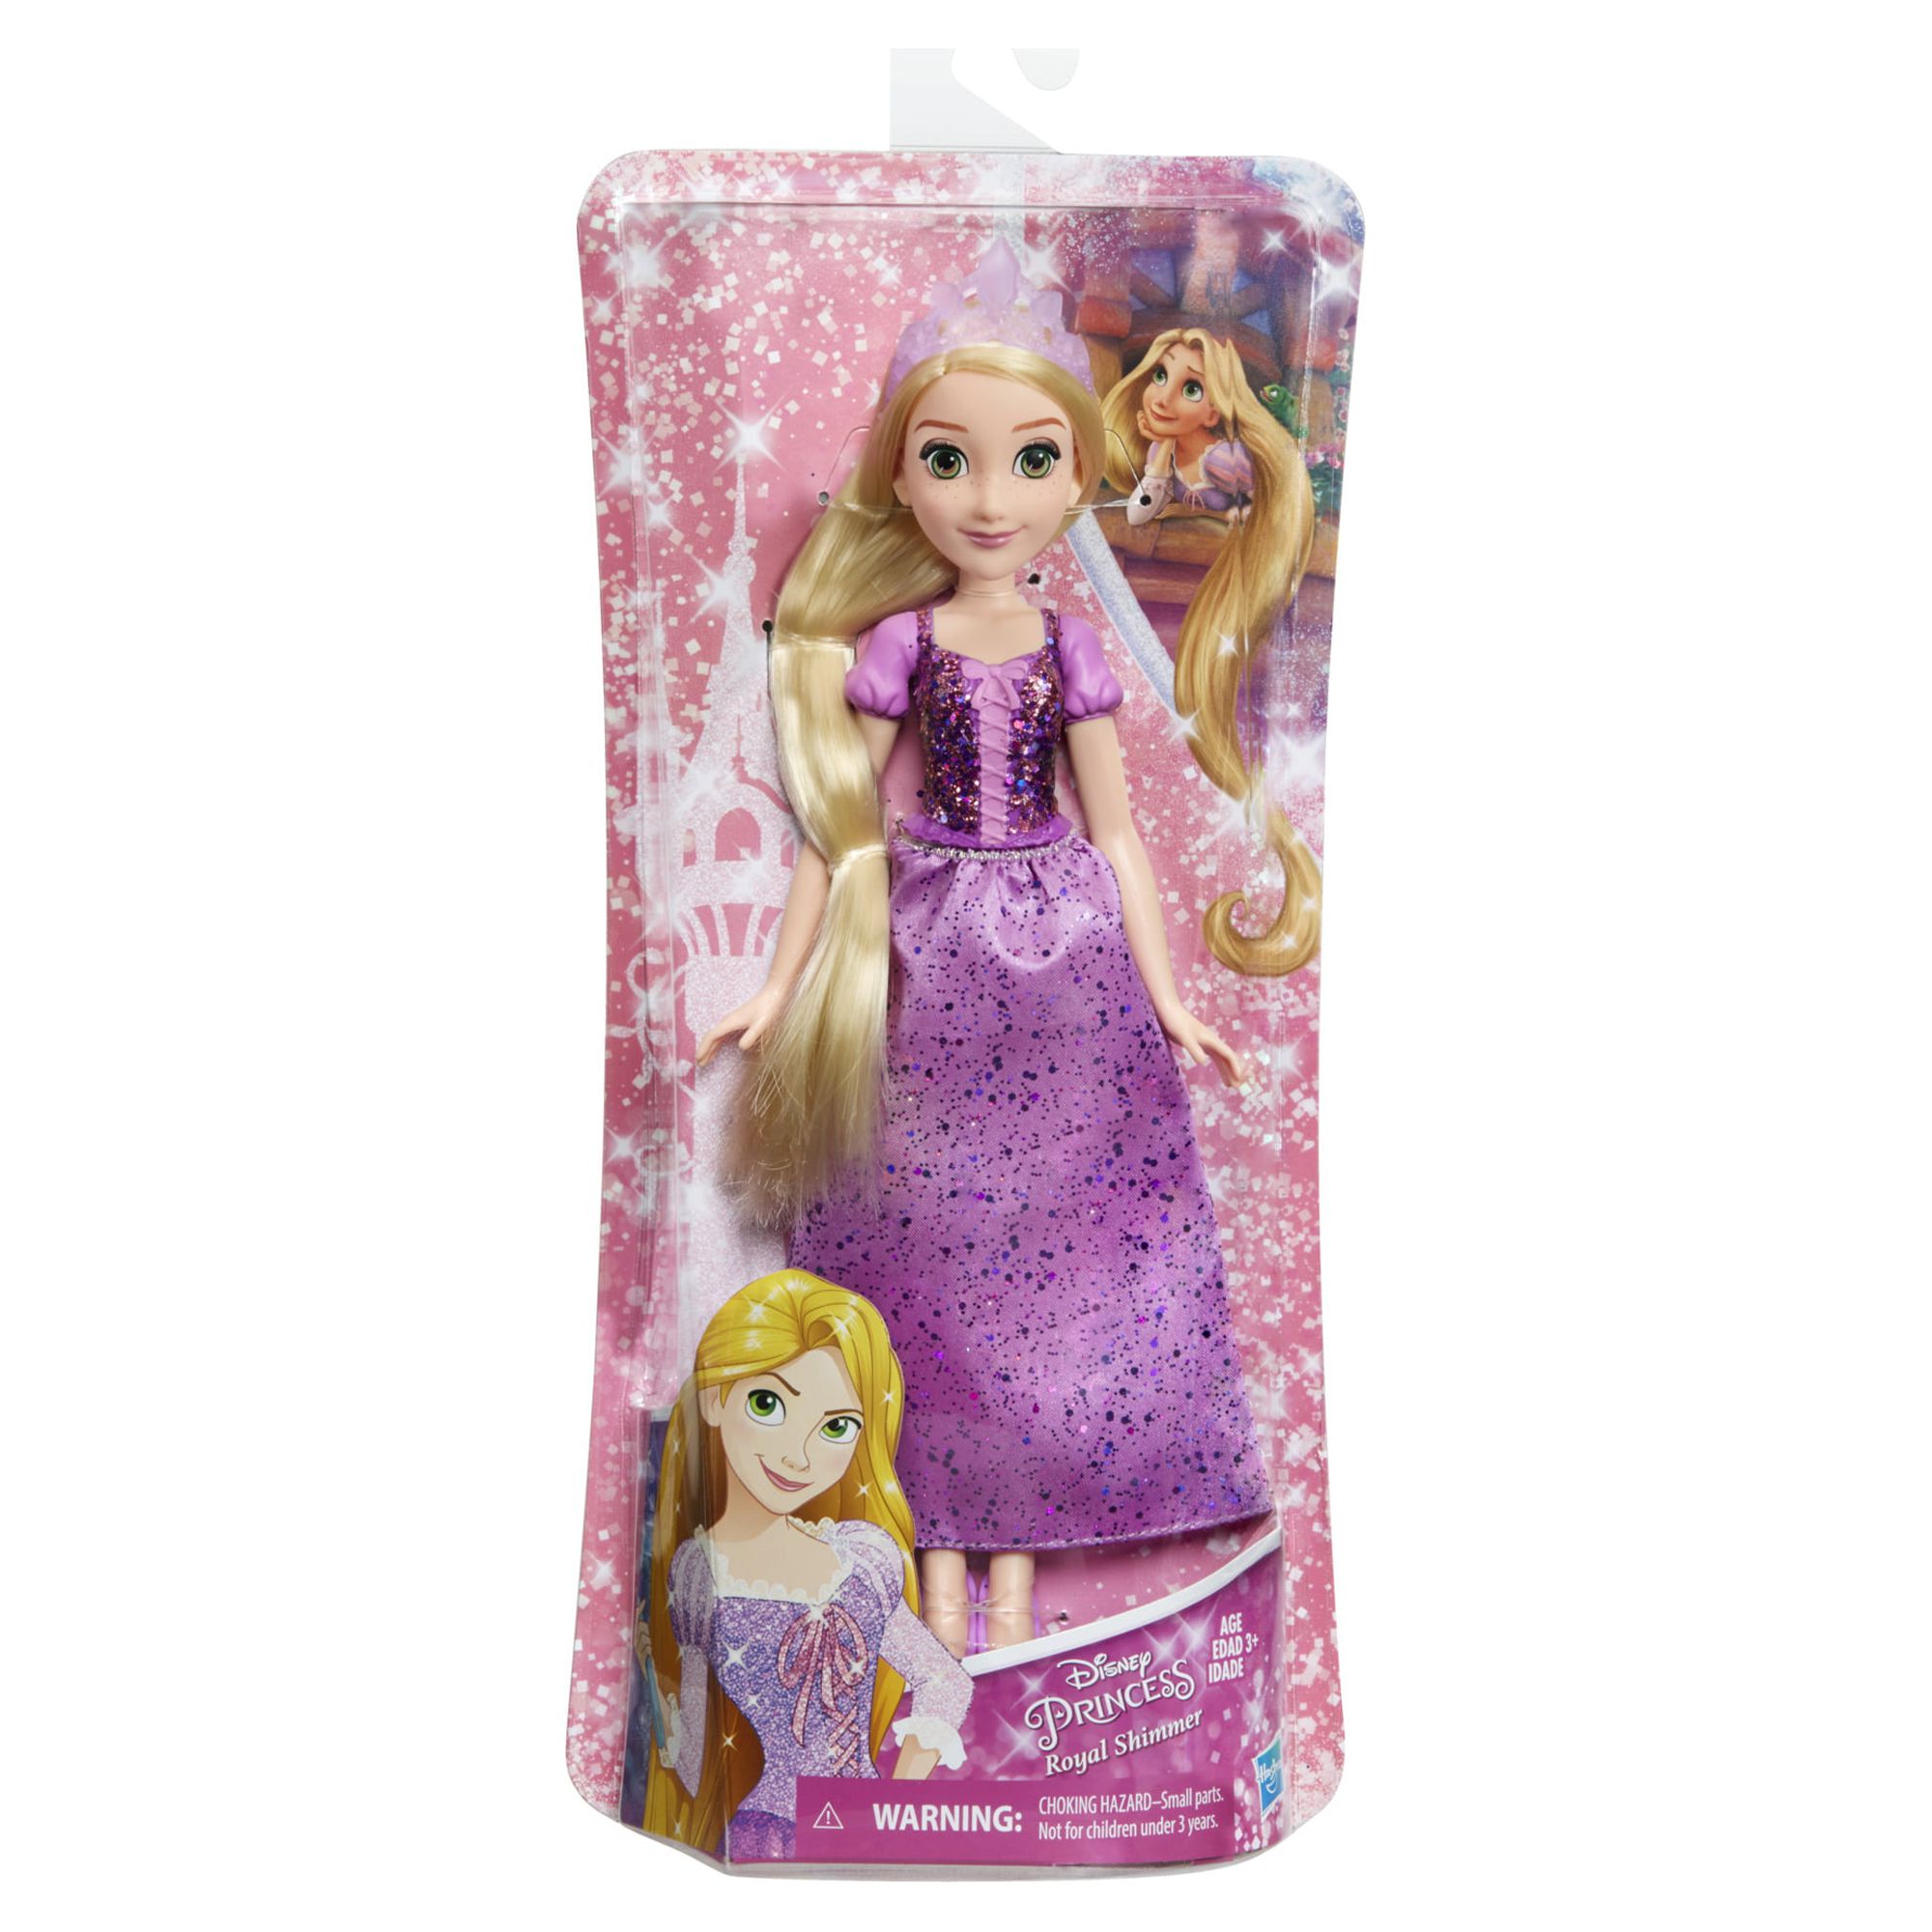 Disney Princess Royal Shimmer Rapunzel, Ages 3 and up, Includes Tiara and Shoes - image 2 of 10